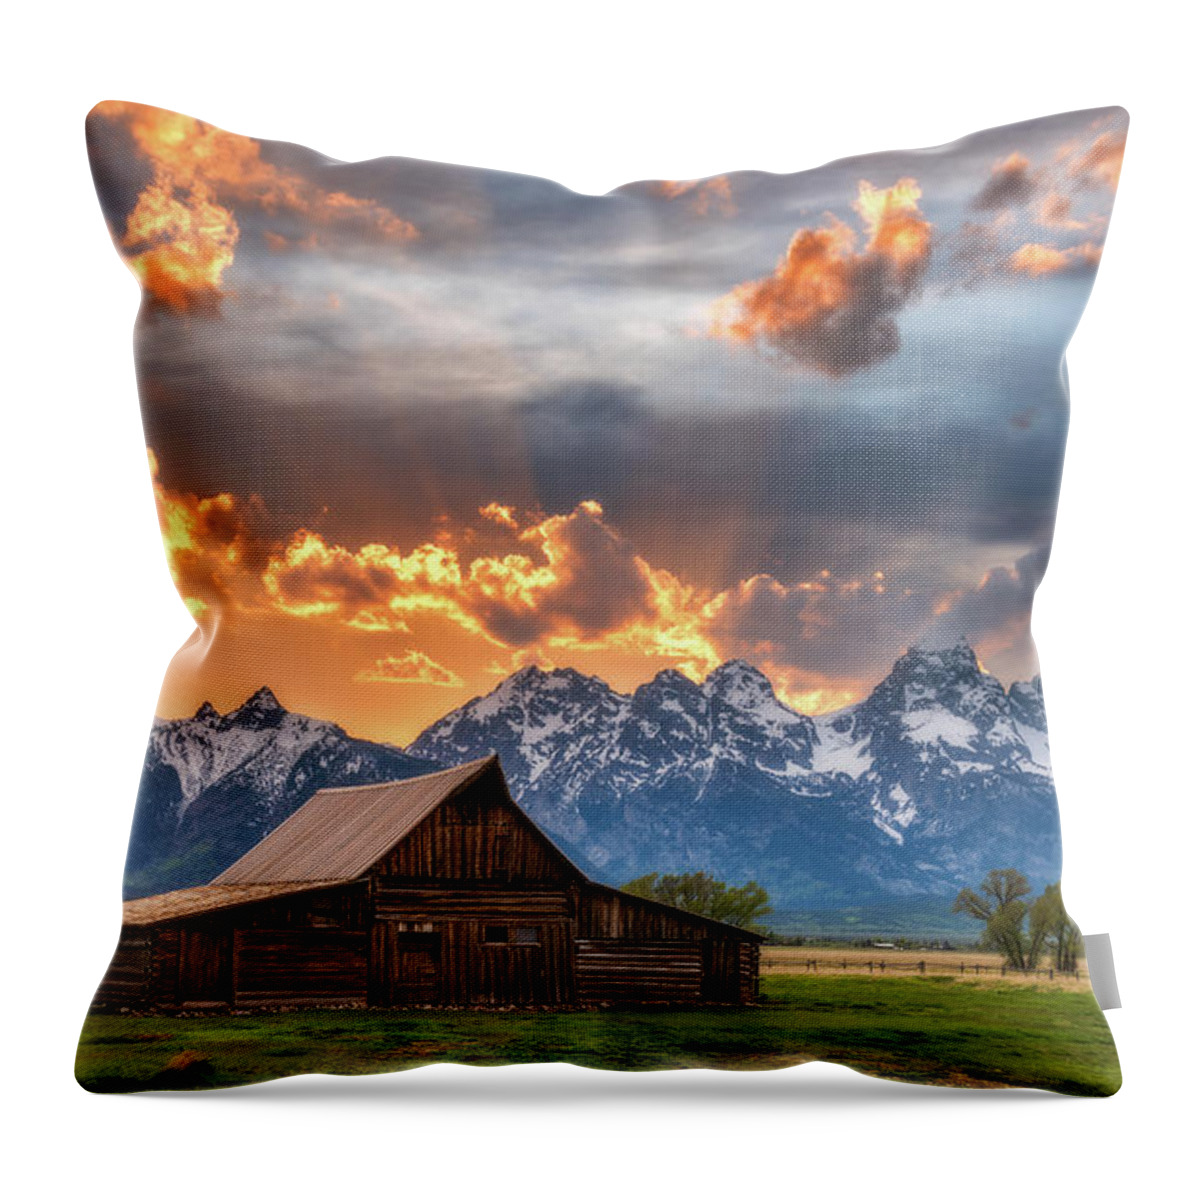 Moulton Barn Throw Pillow featuring the photograph Moulton Barn Sunset Fire by Darren White